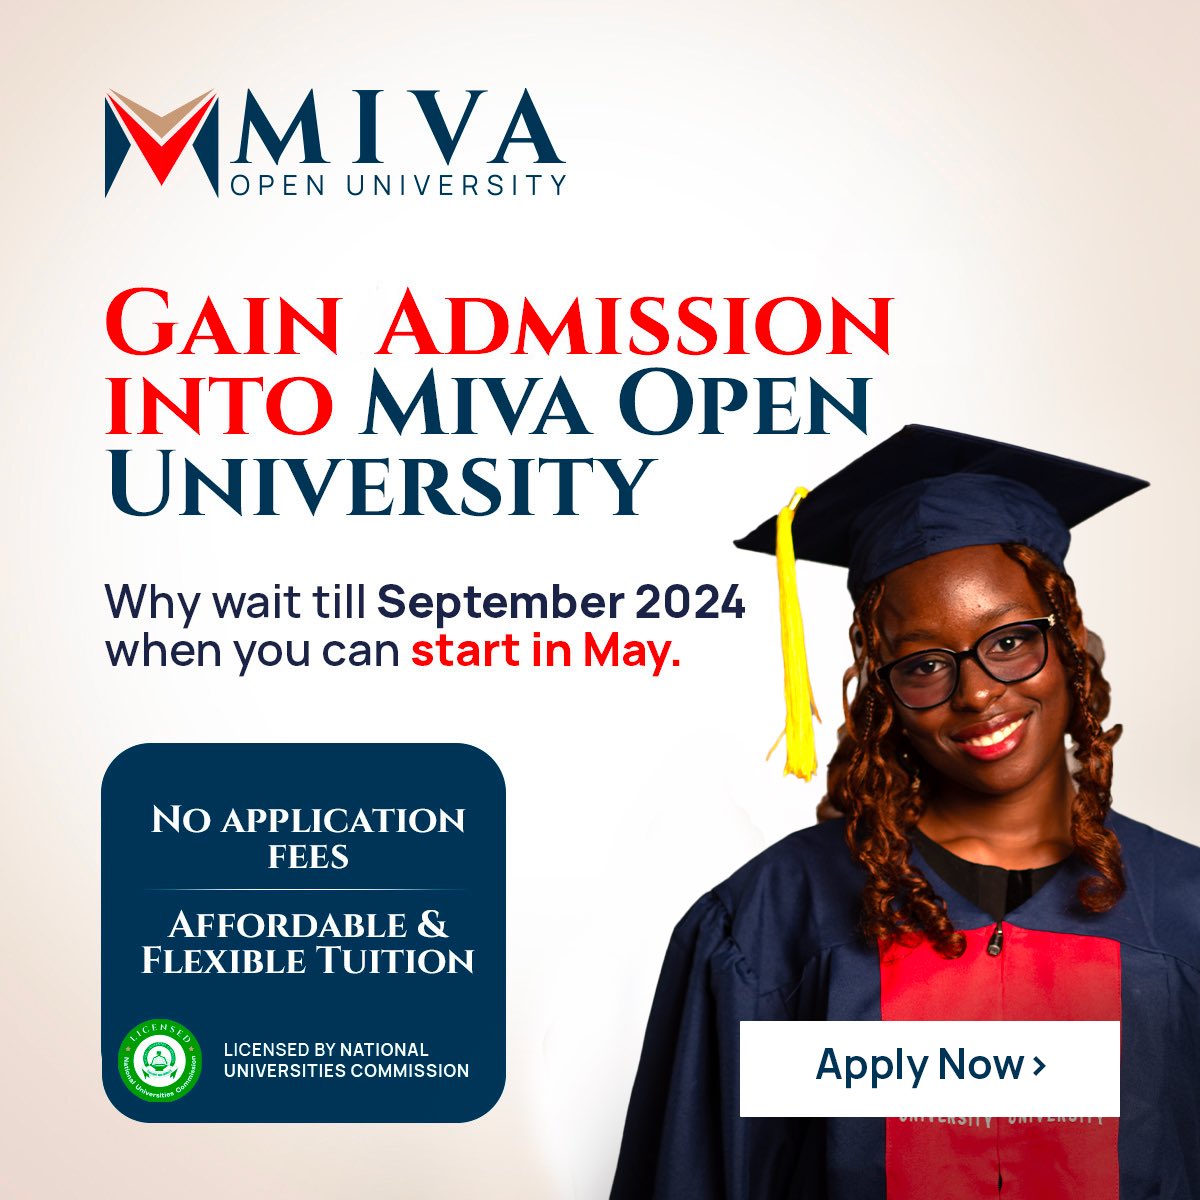 Exciting news! Applications Now Open for May 2024 Intake. 🎓

Apply now at miva.university and enjoy flexible and personalized learning experience. 

Application is FREE! ✅

#MivaOpenUniversity #OnlineUniversity #BachelorsDegree #StudyatMiva #VirtualLearning